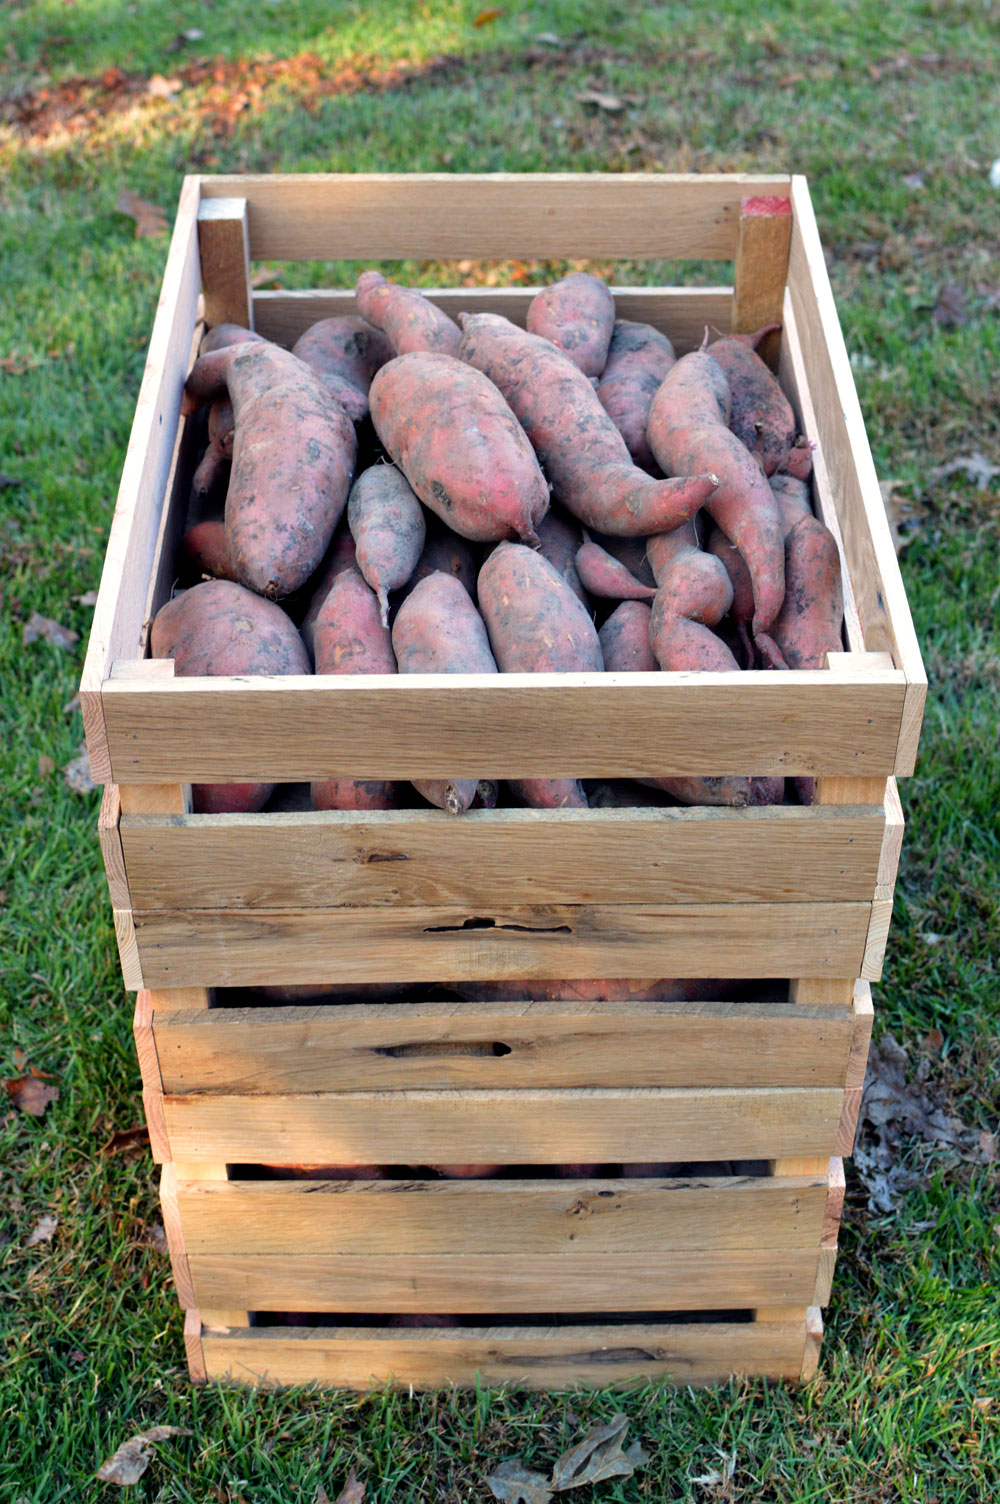  Cam built me some custom crates for my sweet potatoes. They nest together and are stackable! This is four crates stacked. 